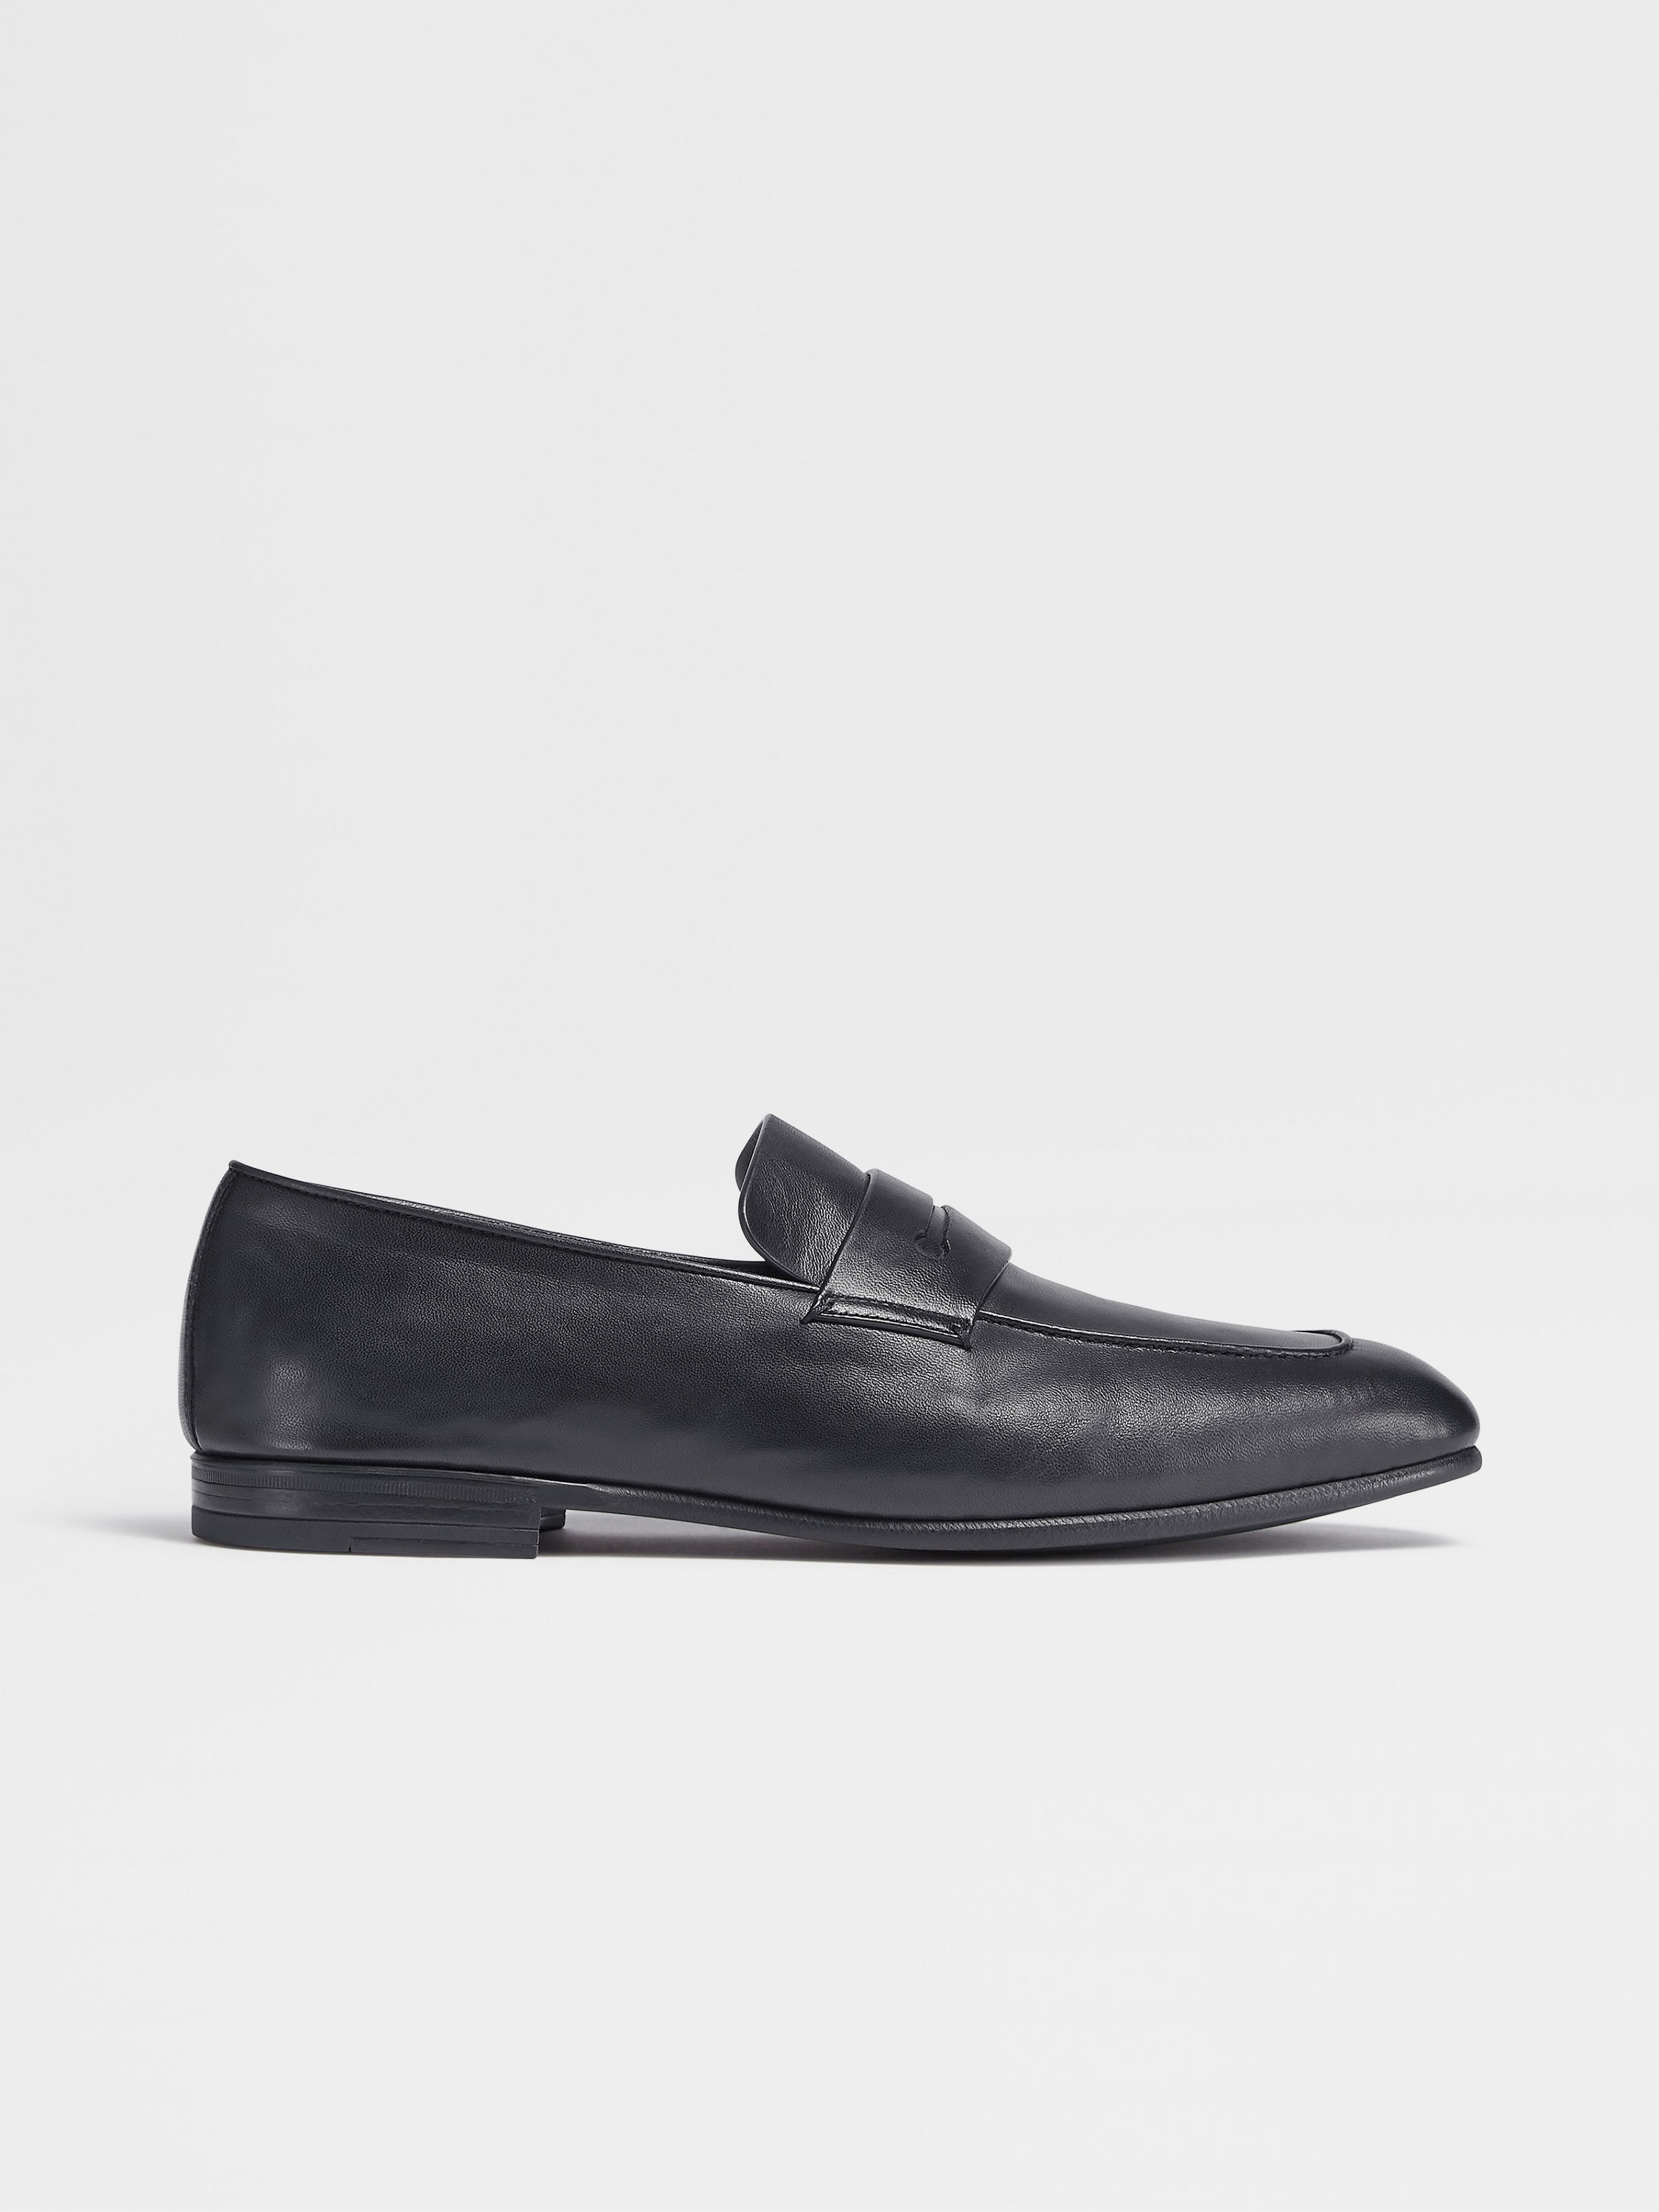 Navy Blue Leather L'Asola Loafers